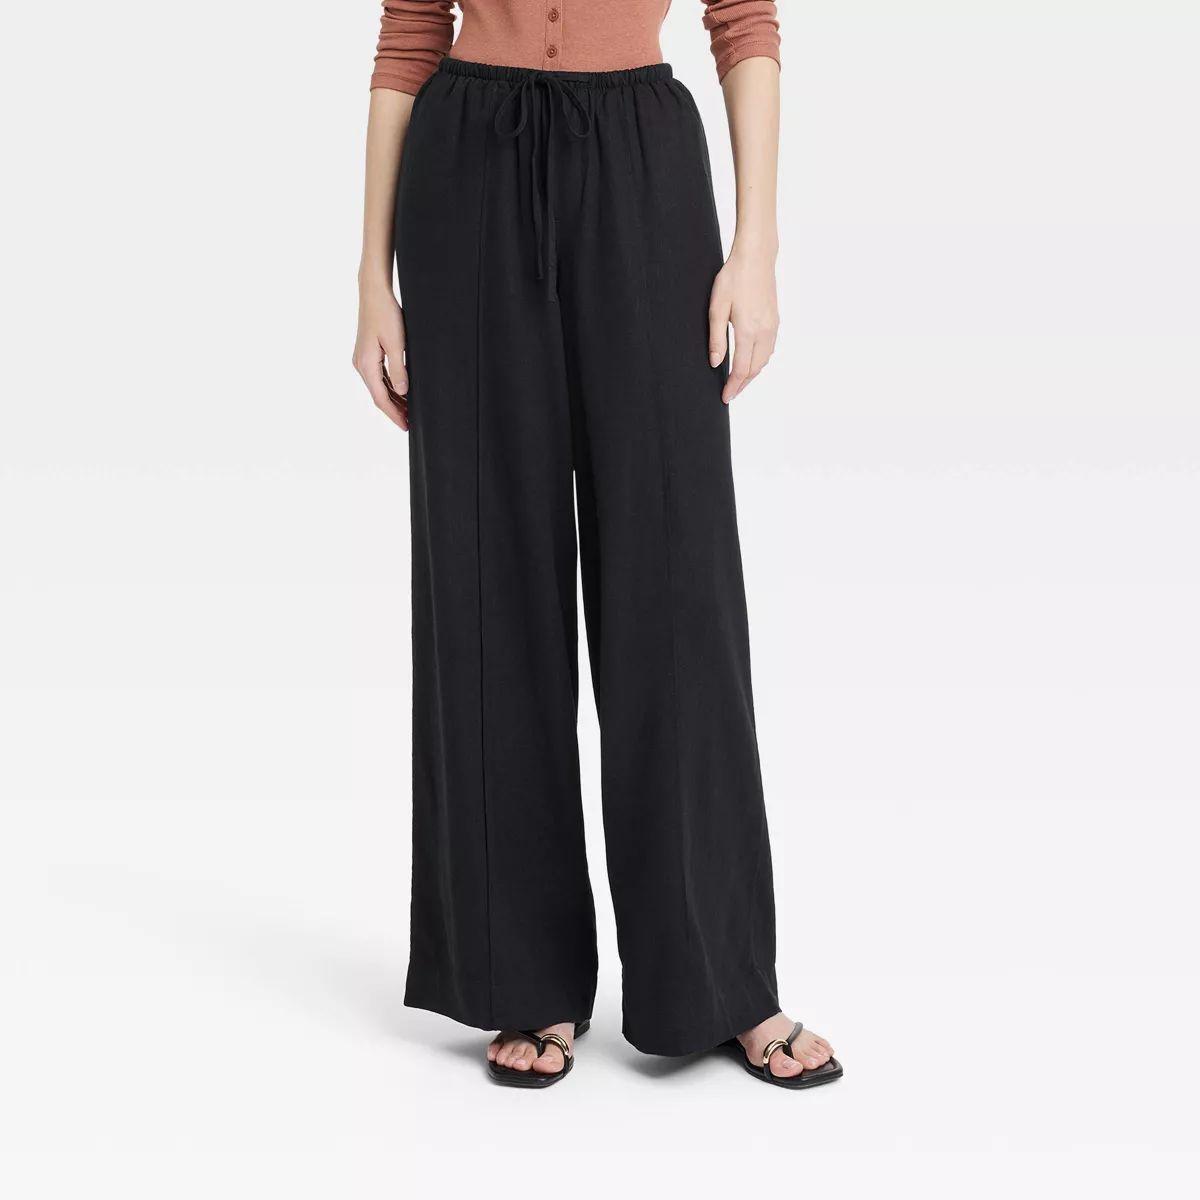 Women's High-Rise Wide Leg Linen Pull-On Pants - A New Day™ Black S | Target